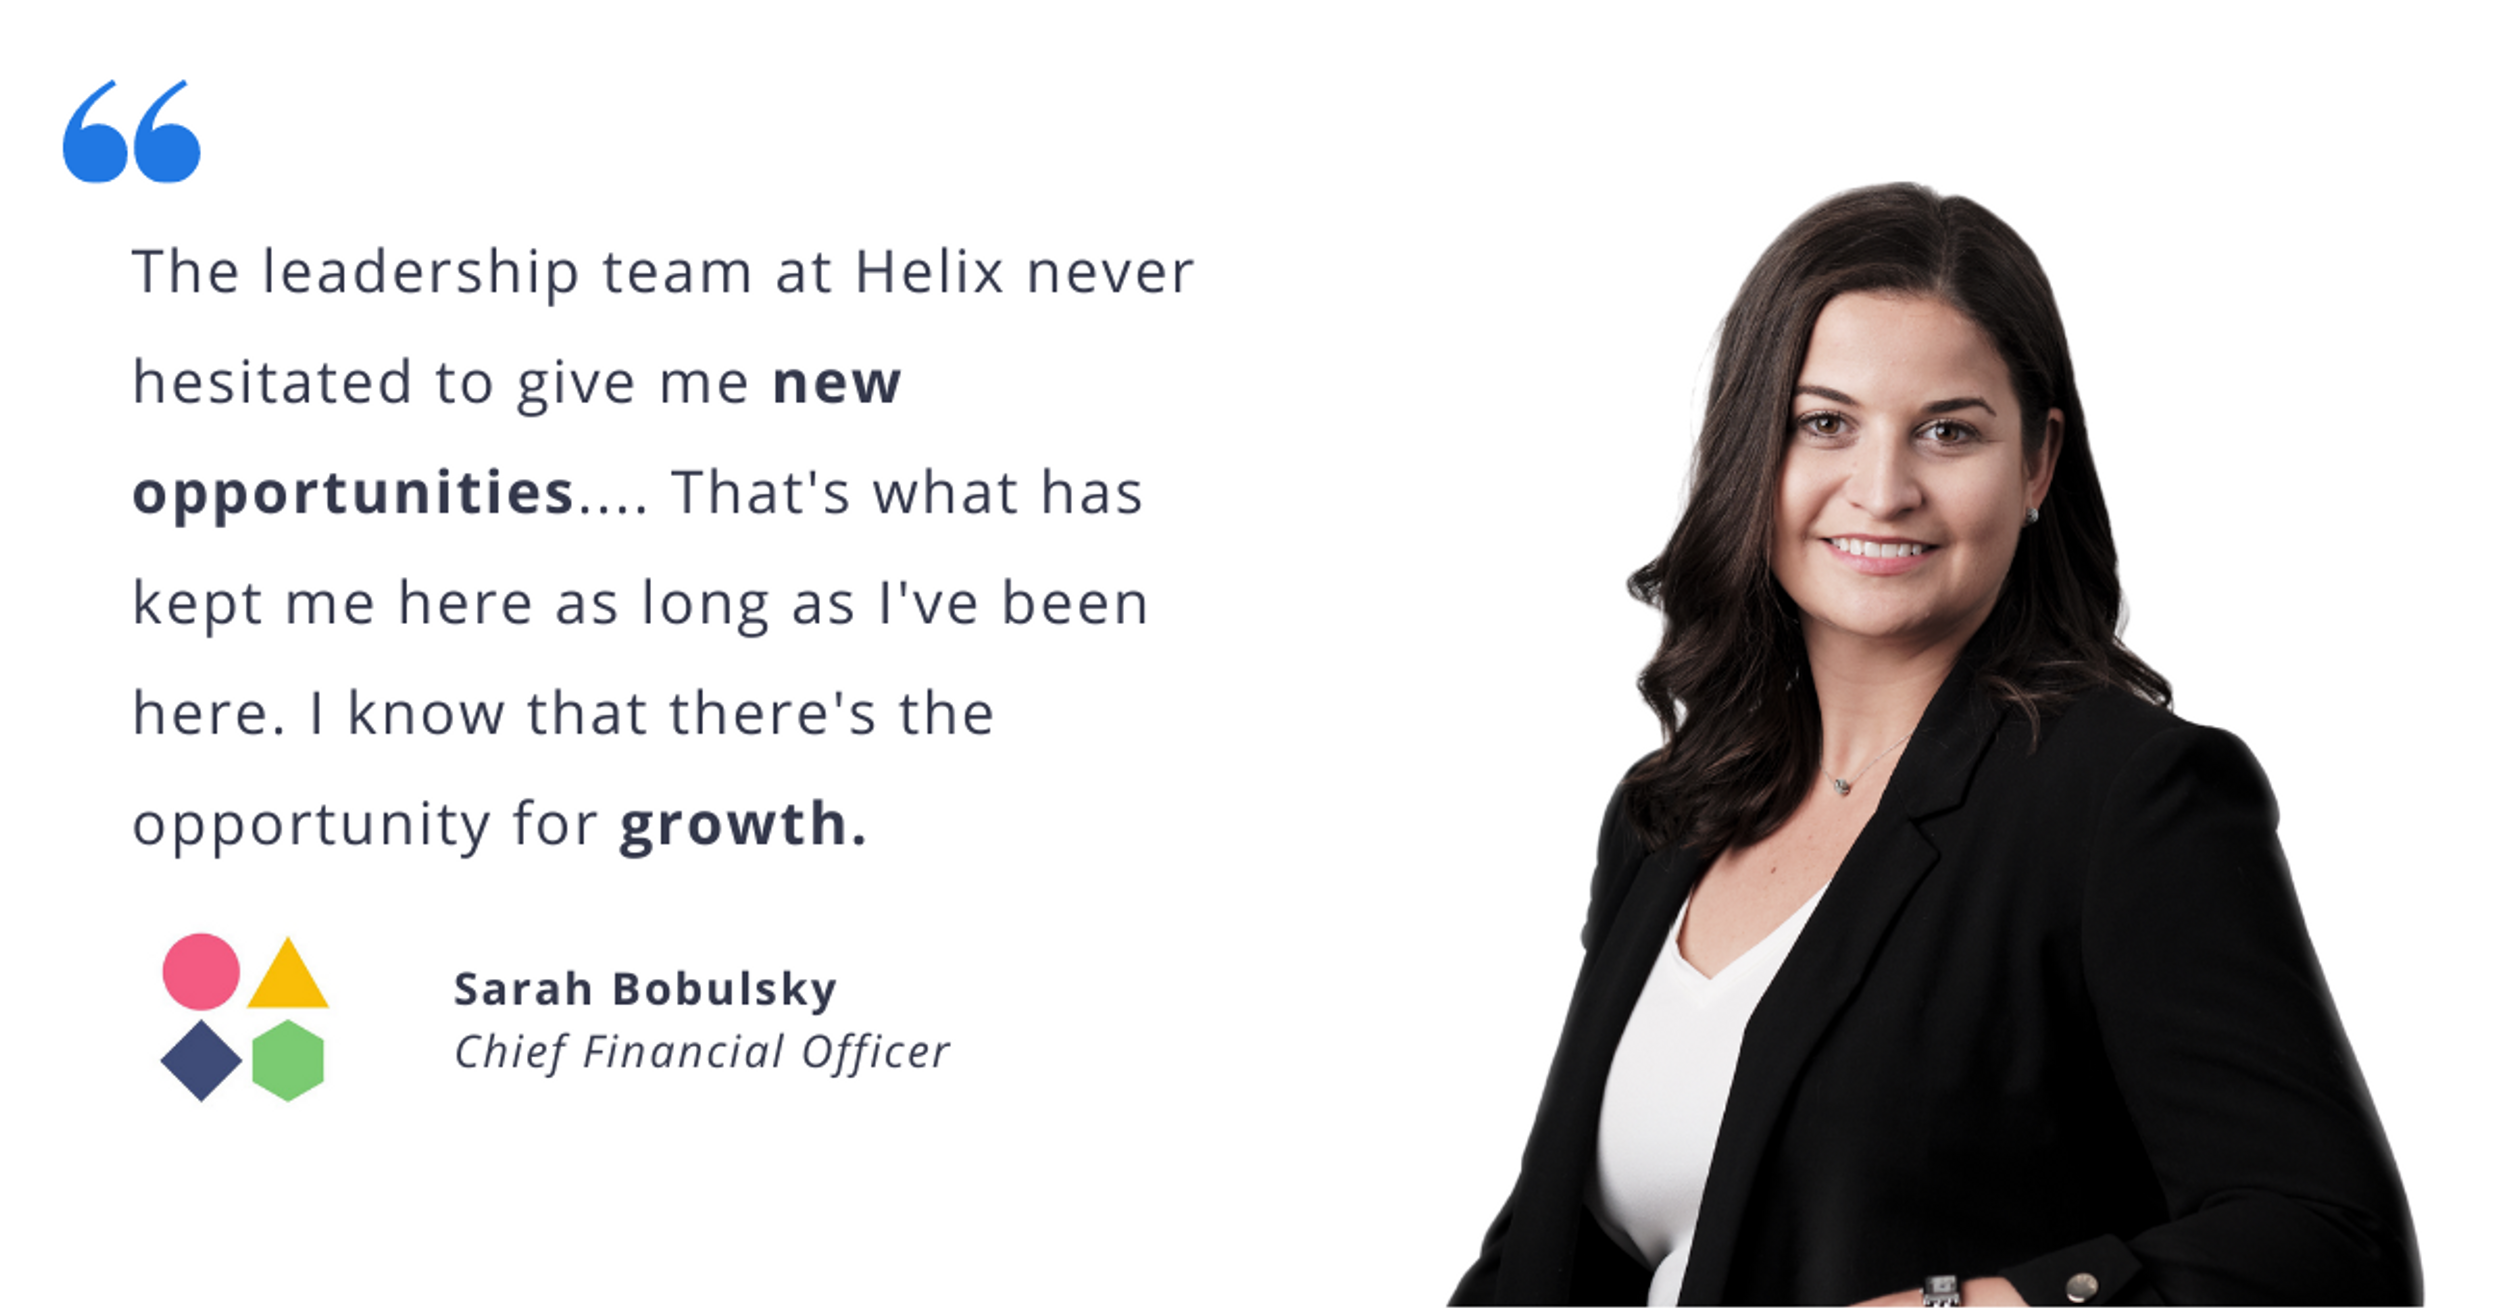 Blog post header with quote from Sarah Bobulsky, Chief Financial Officer at Helix